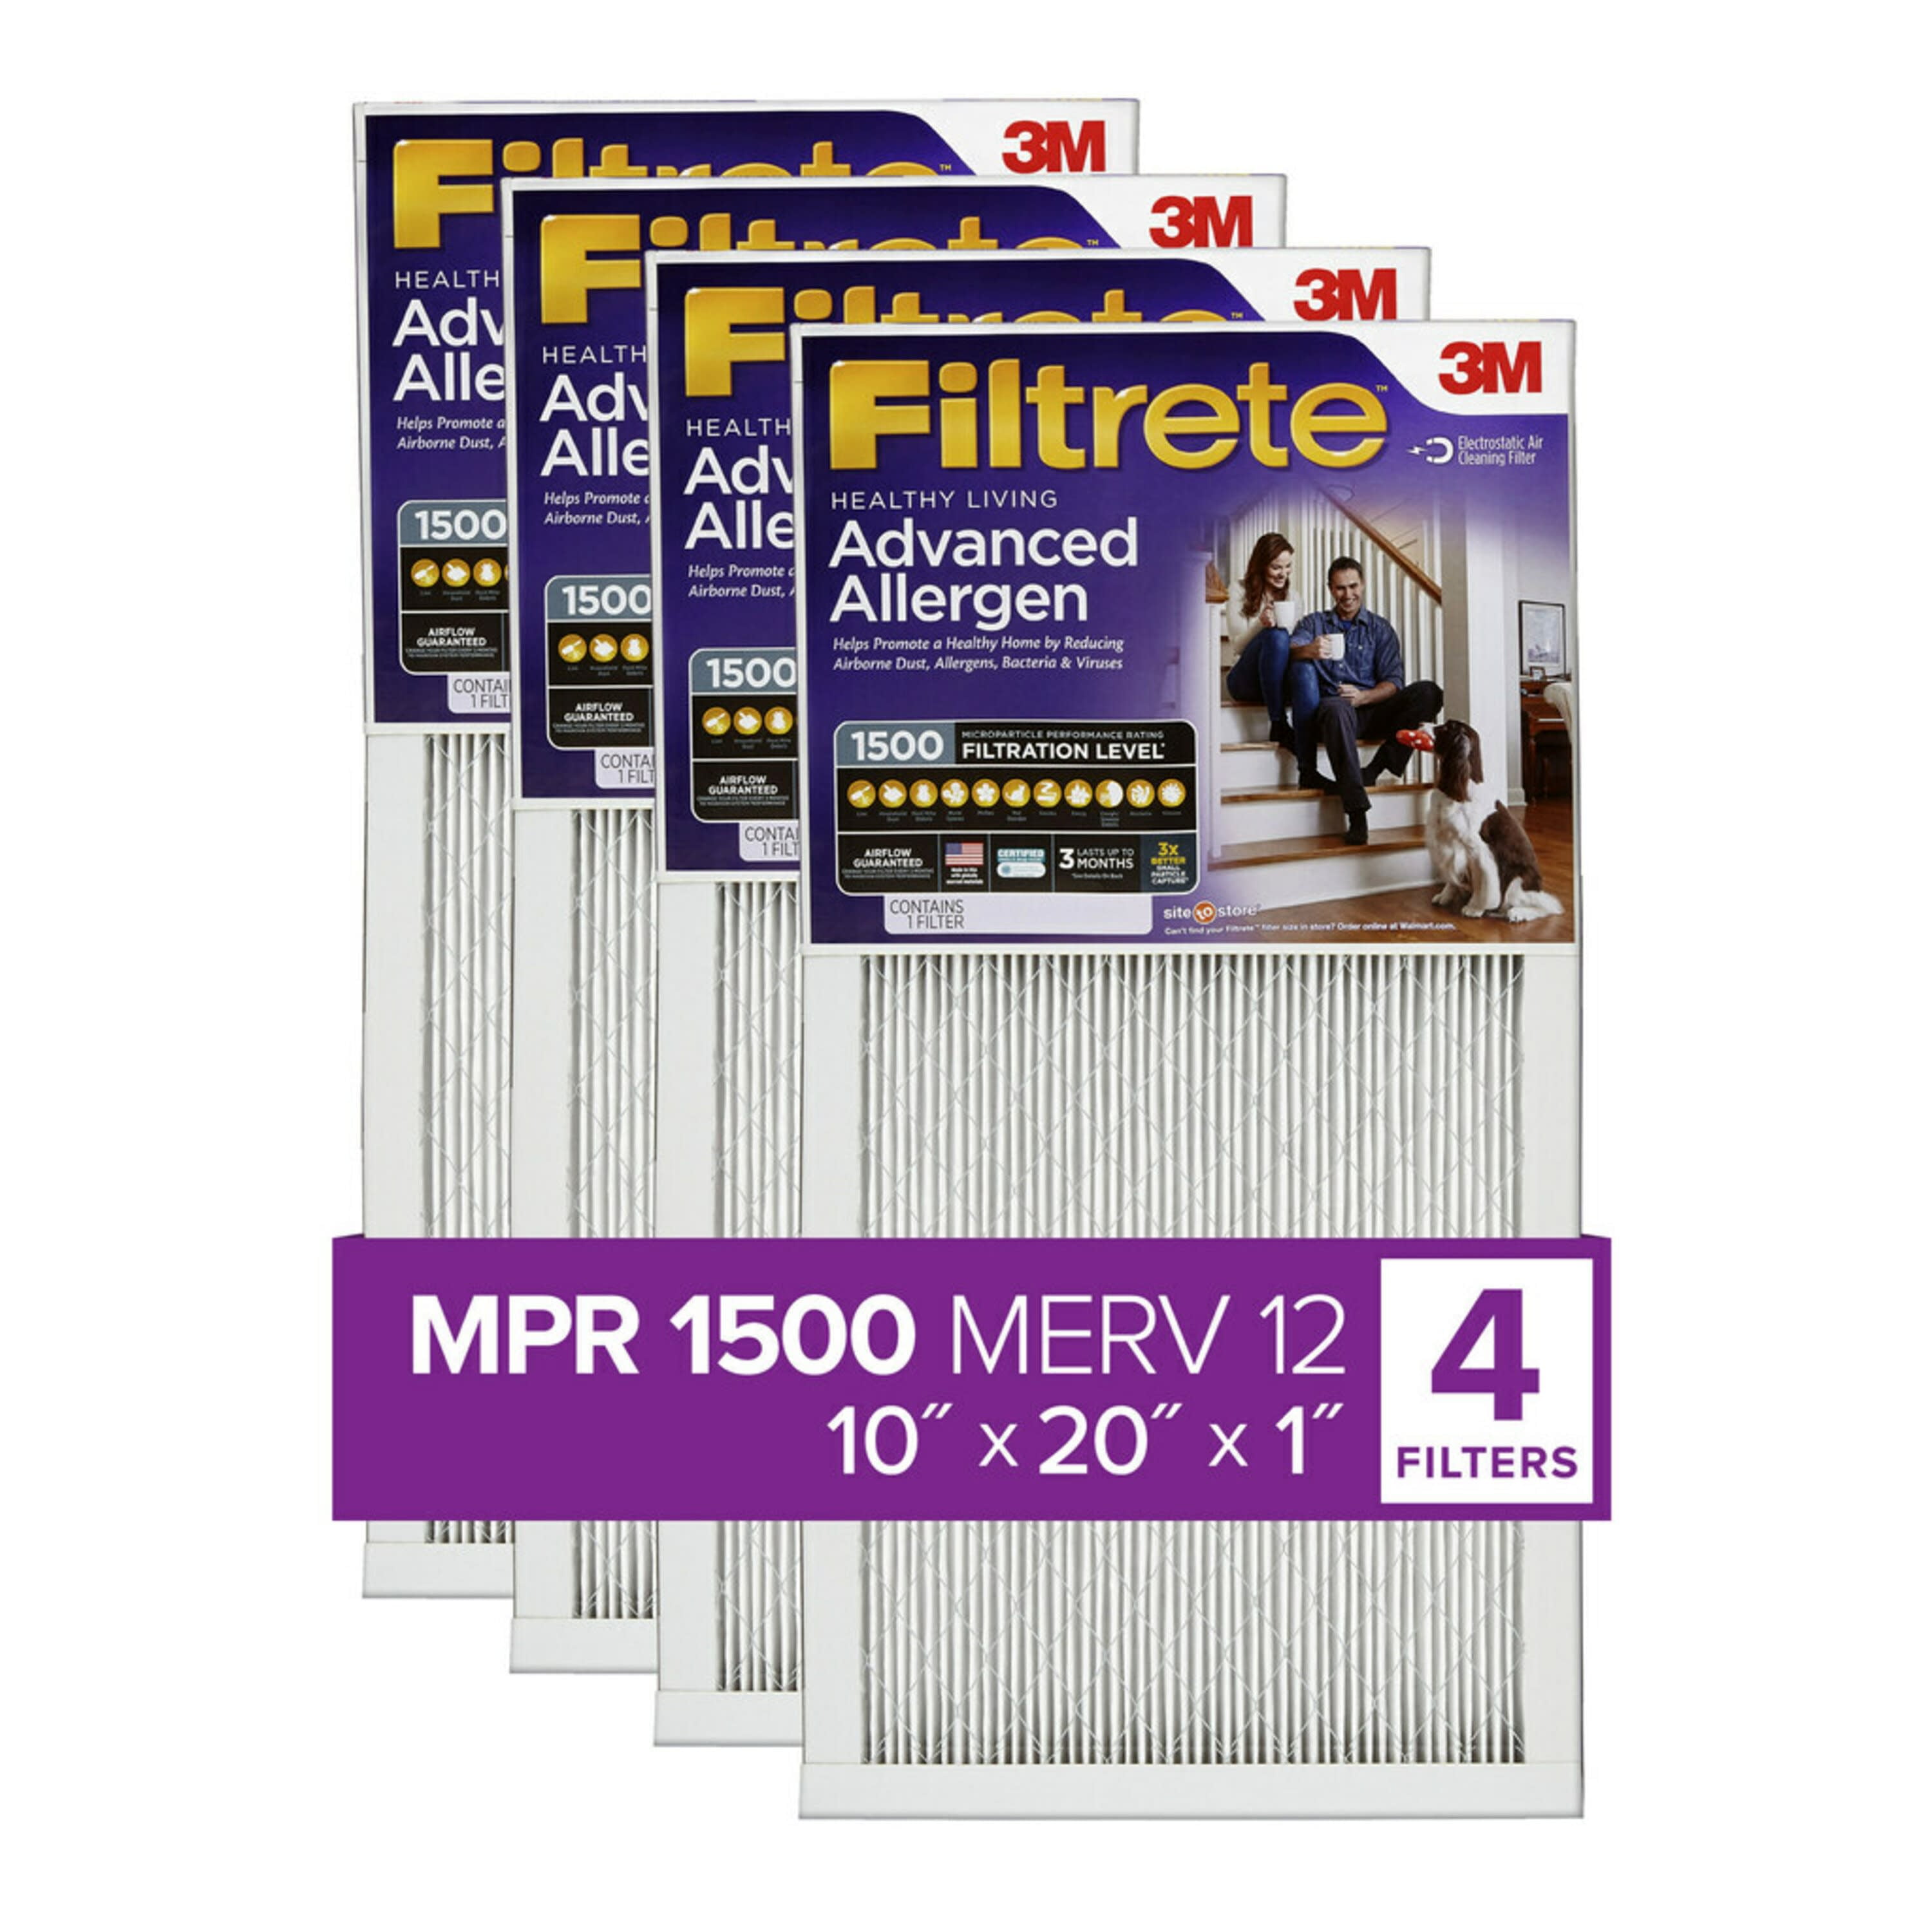 3M Filtrete 10x20x1 4 Pack of Filters-FREE SHIPPING Allergen Reduction 